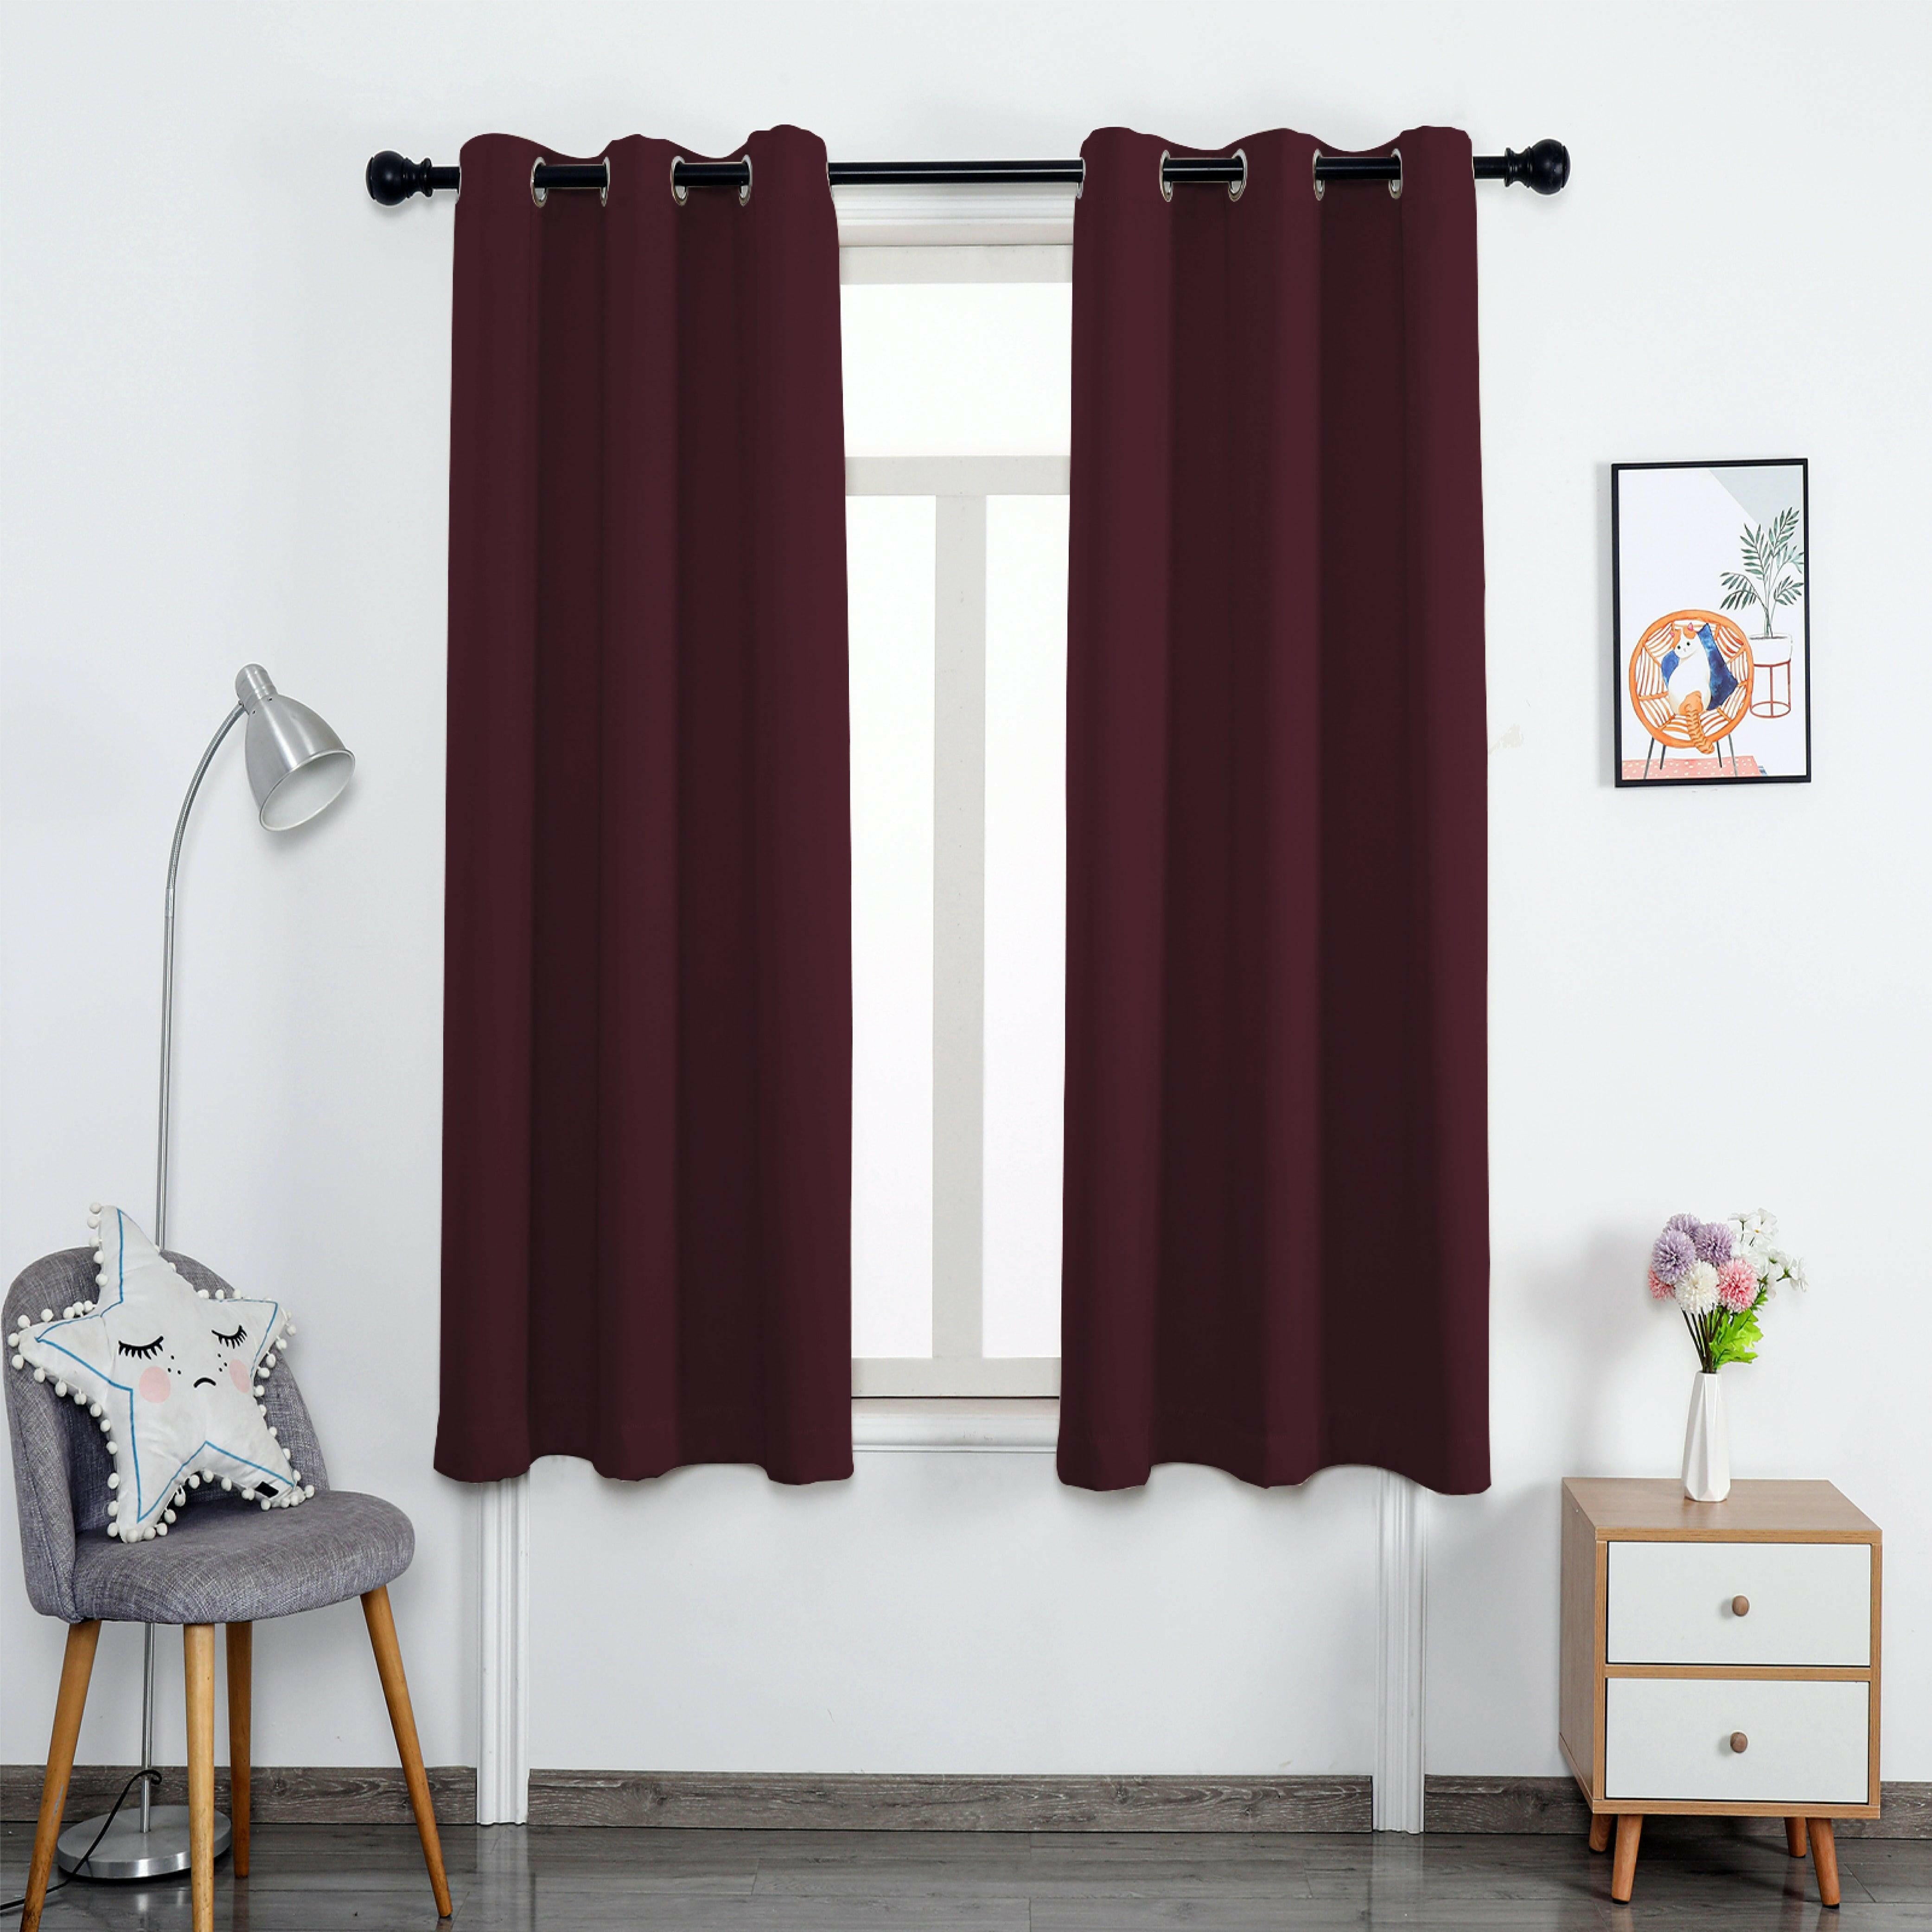 Hyper Cover 3-Layers Blockout Curtains Burgundy | Window Curtains | Brilliant Home Living